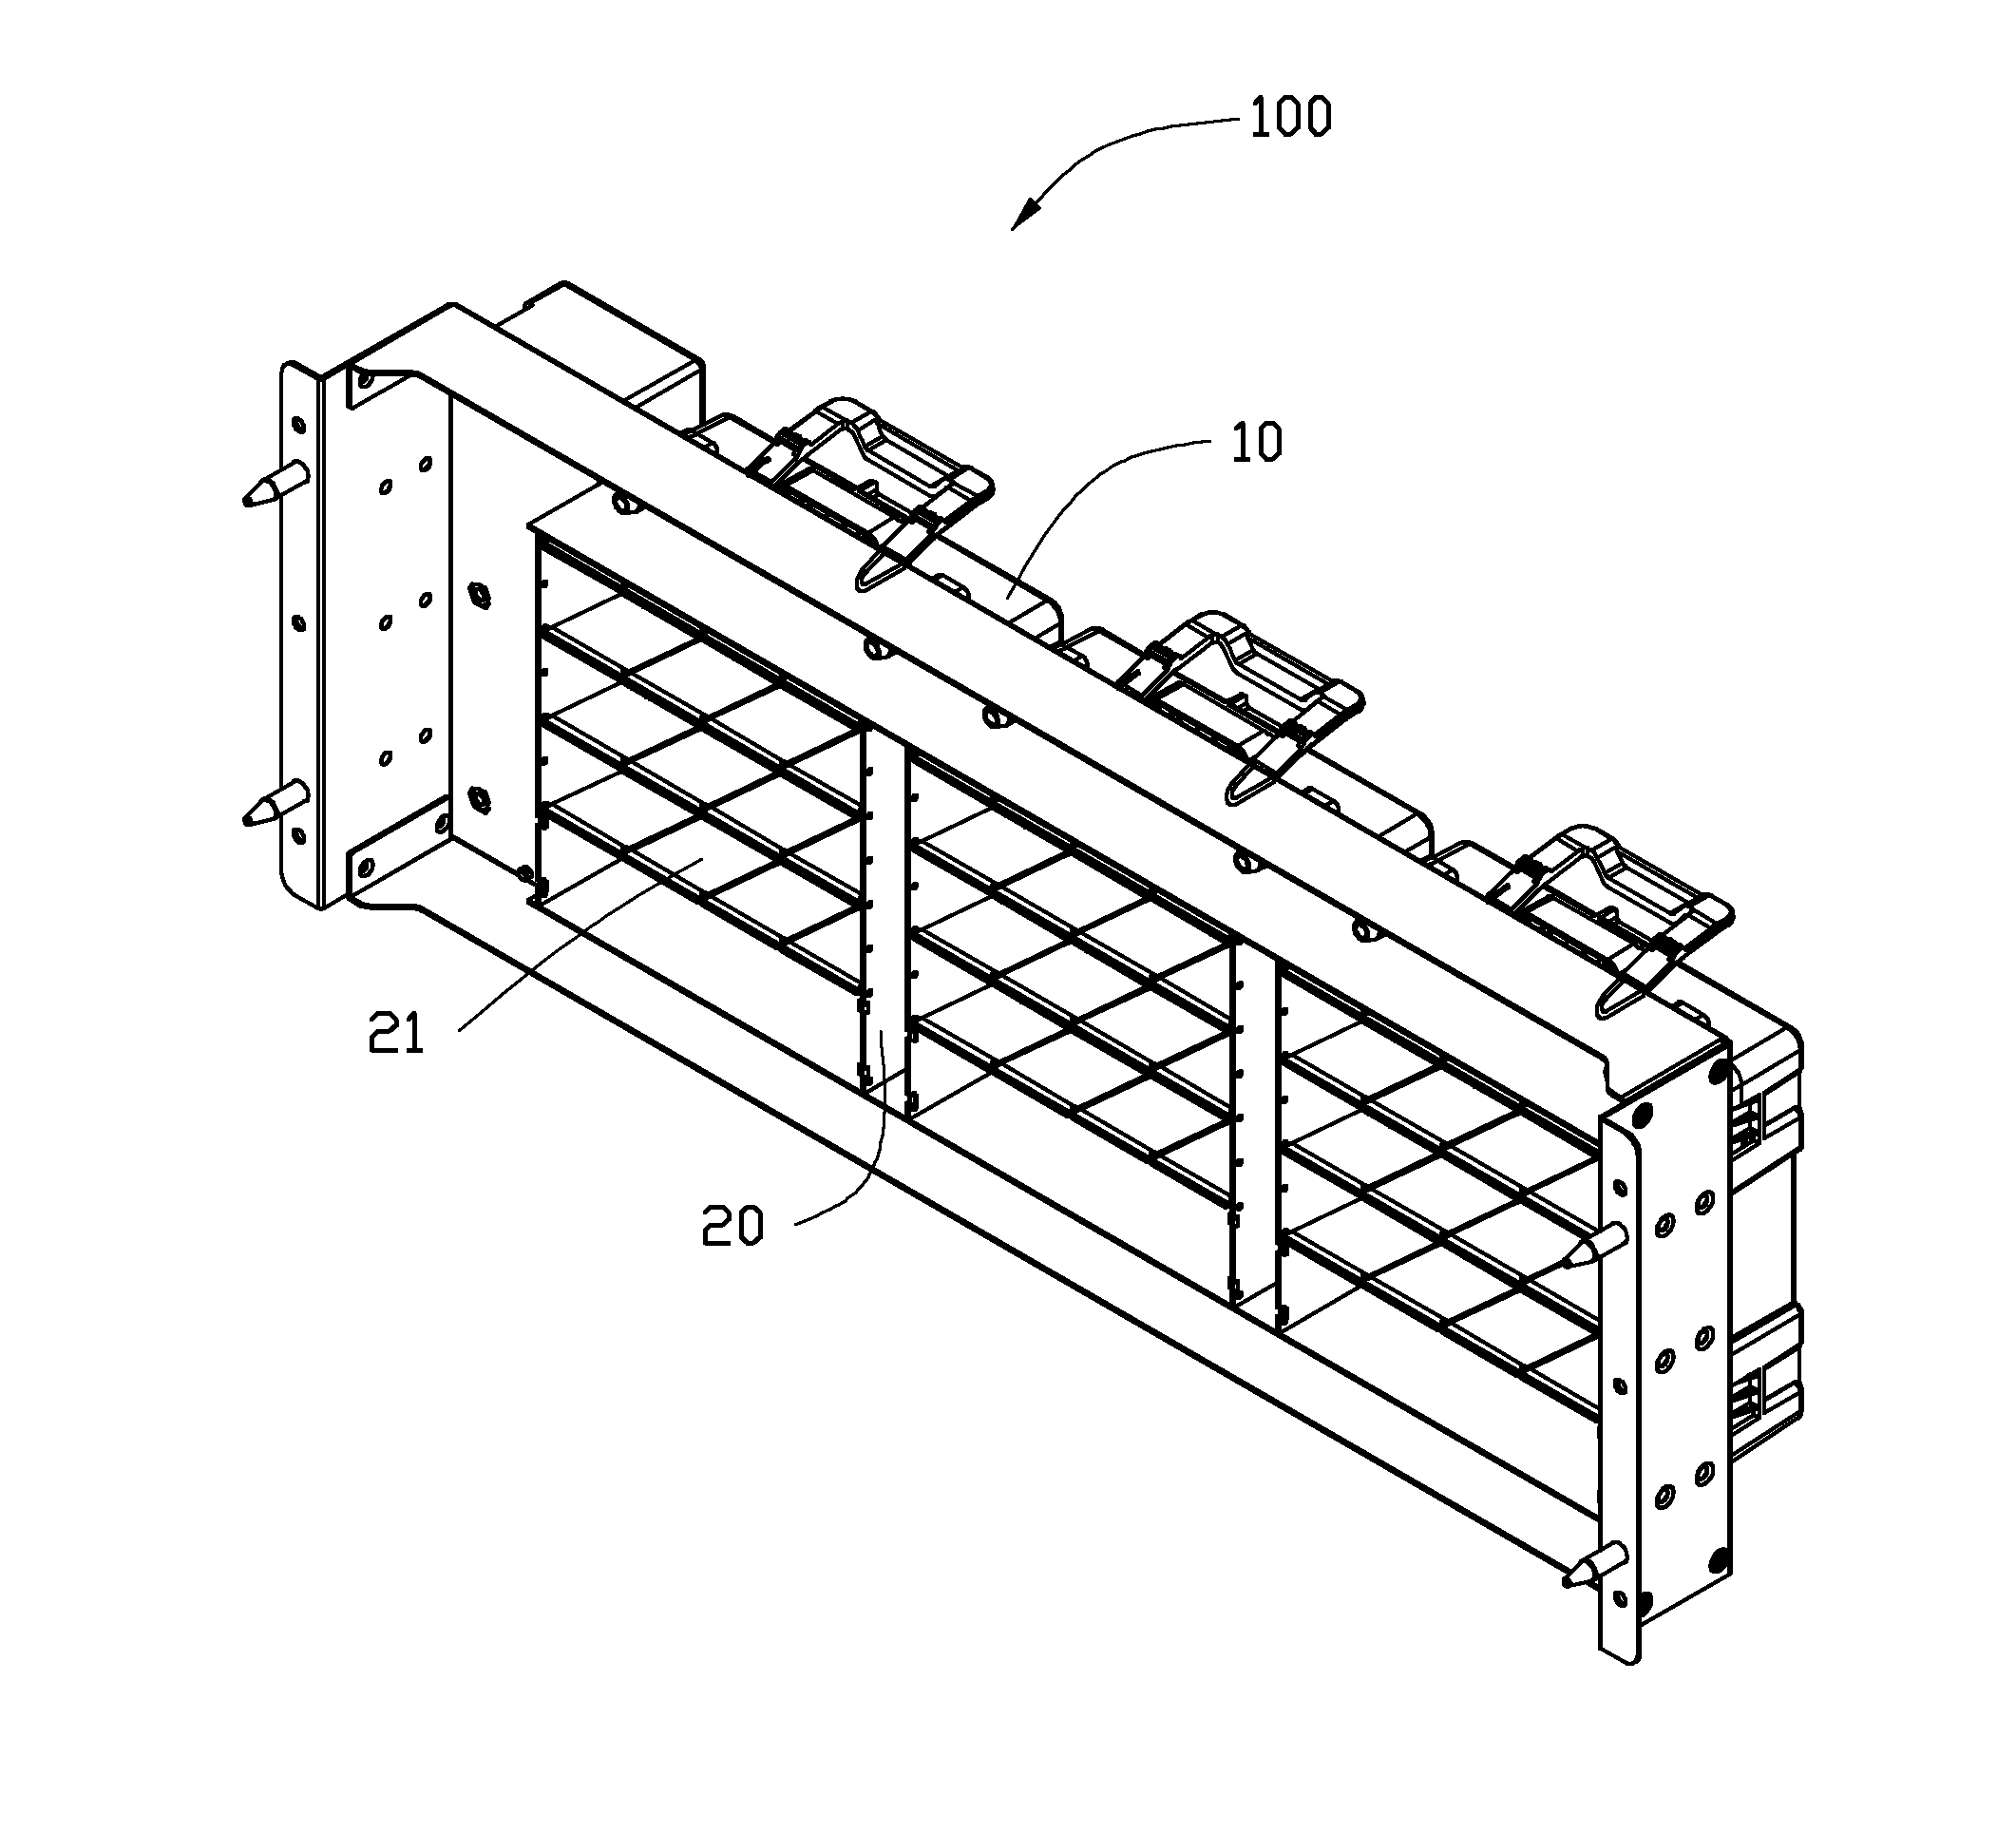 Fan assembly with backflow preventing structure